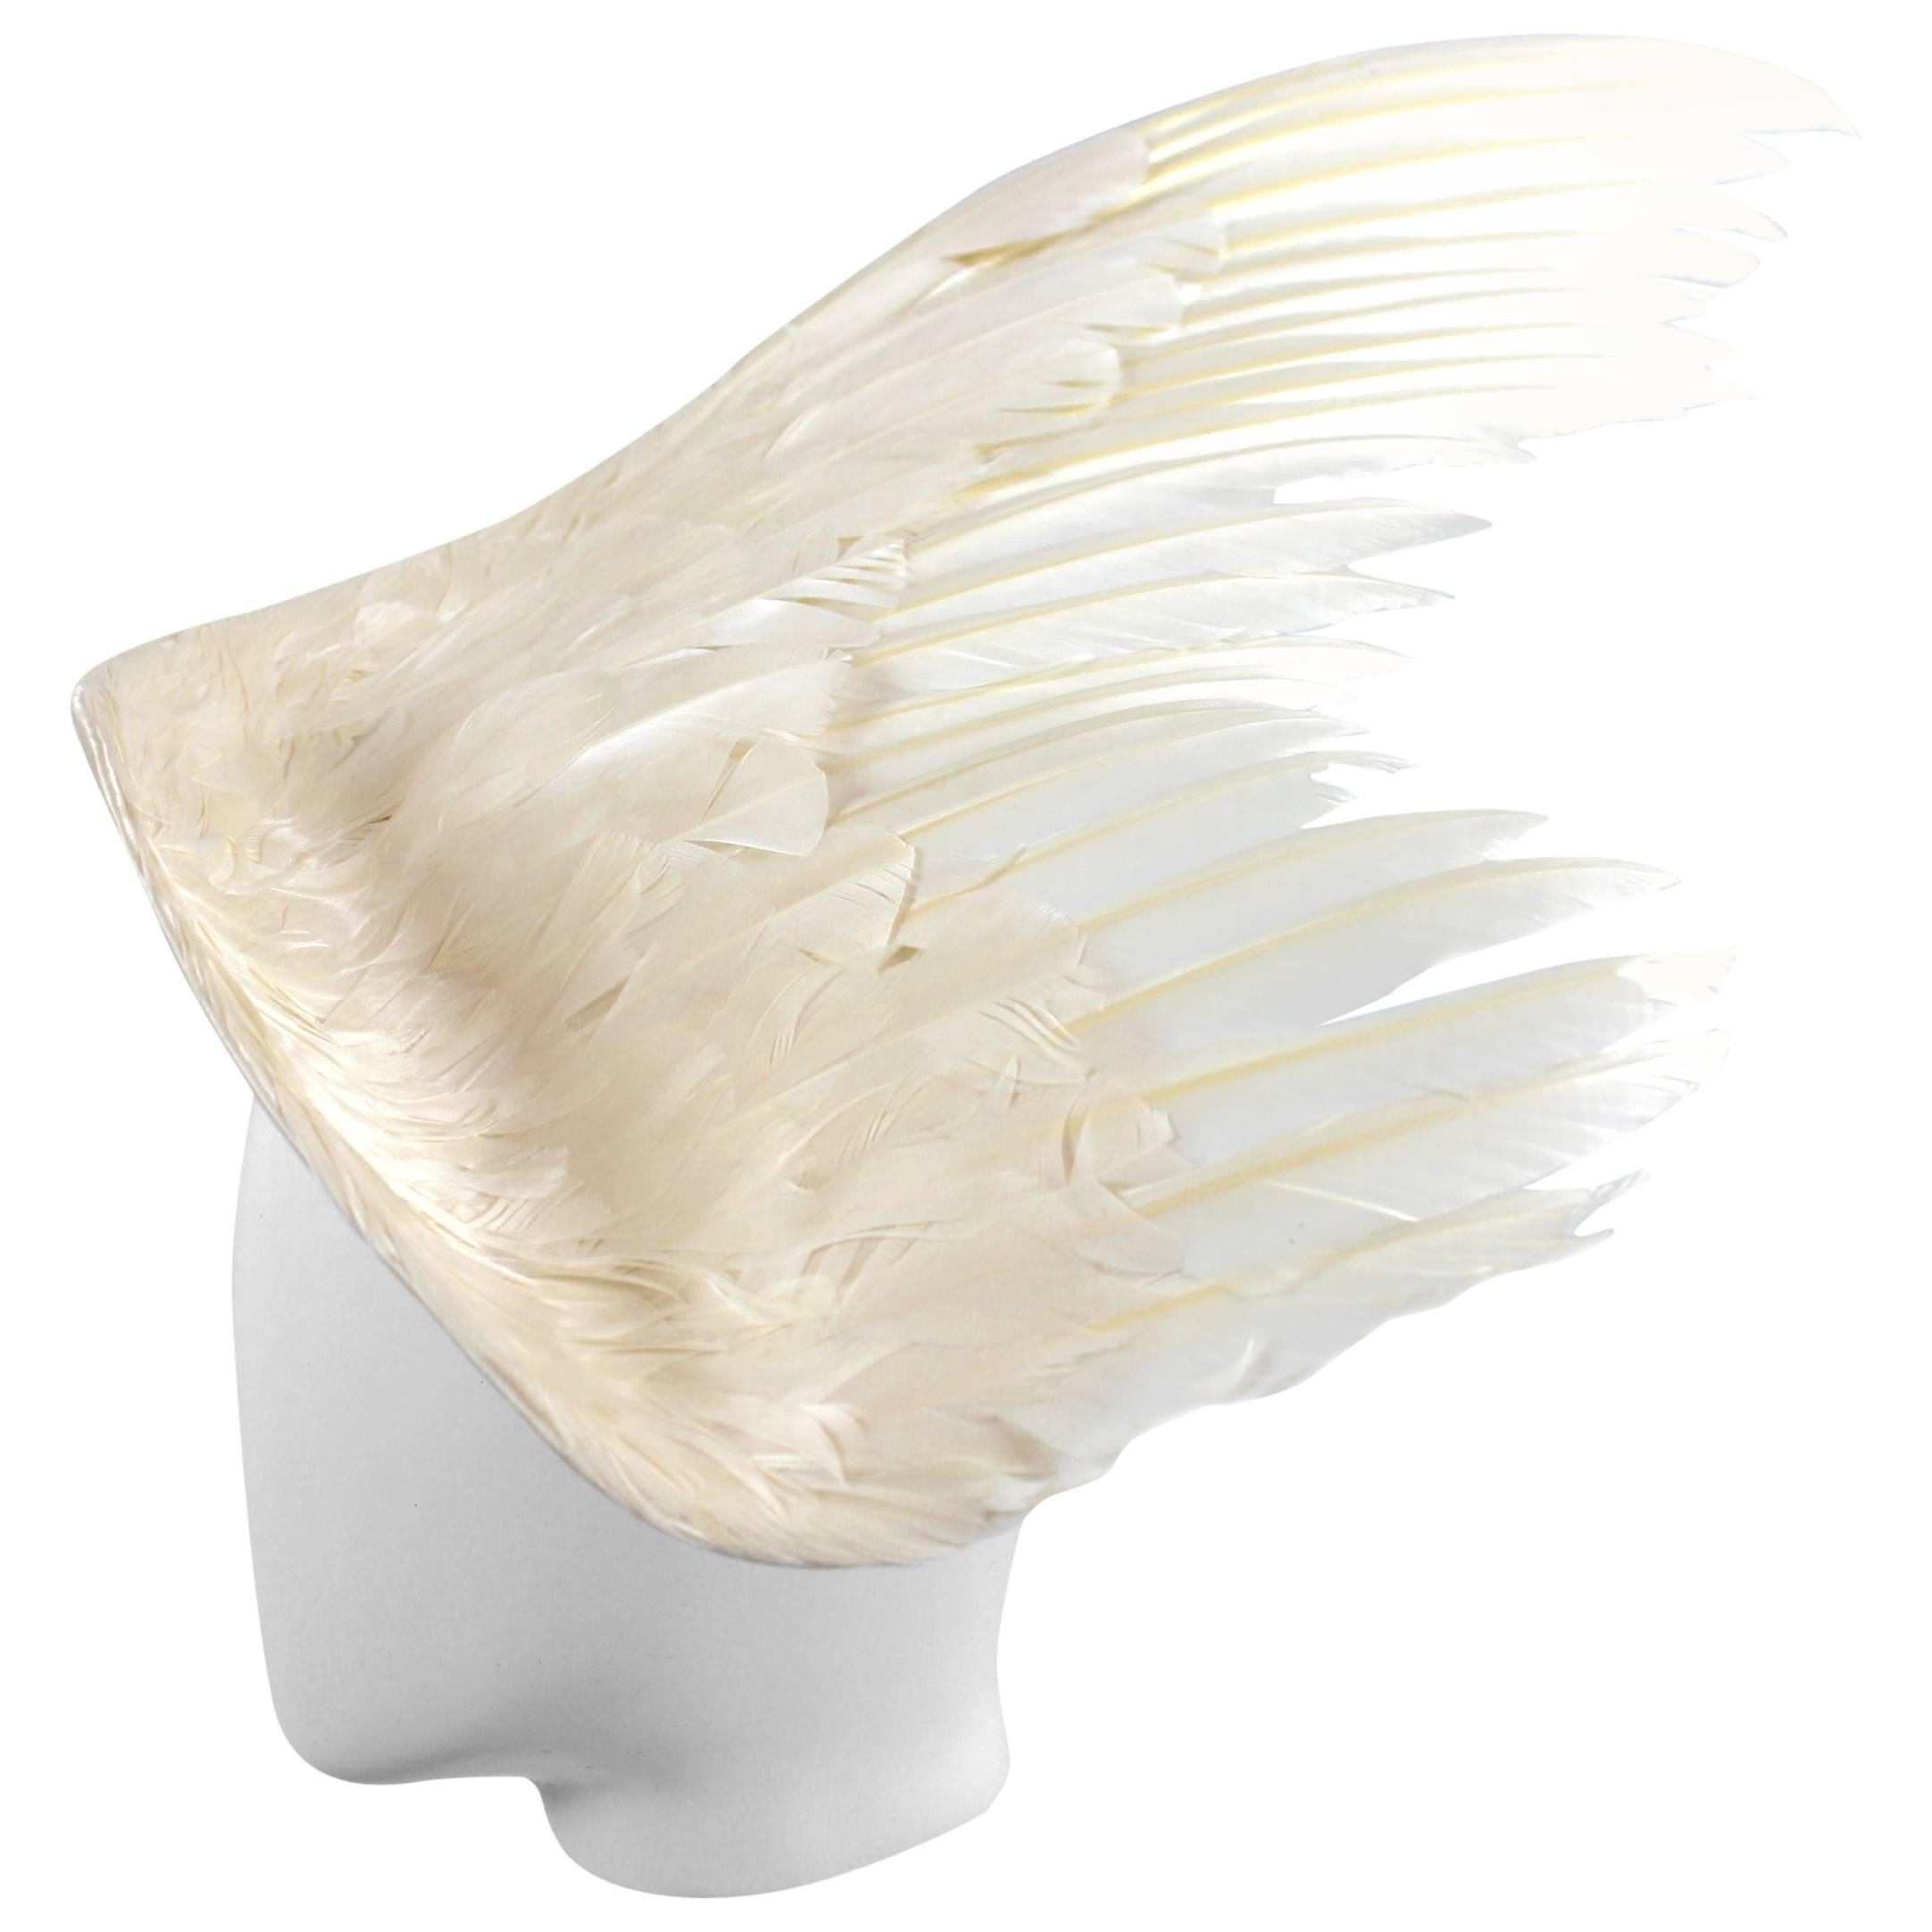 Stephen Jones Feather Runway way hat Circa 1990
White Satin Wing shape covered in White Feathers
22 inch Wingspan
